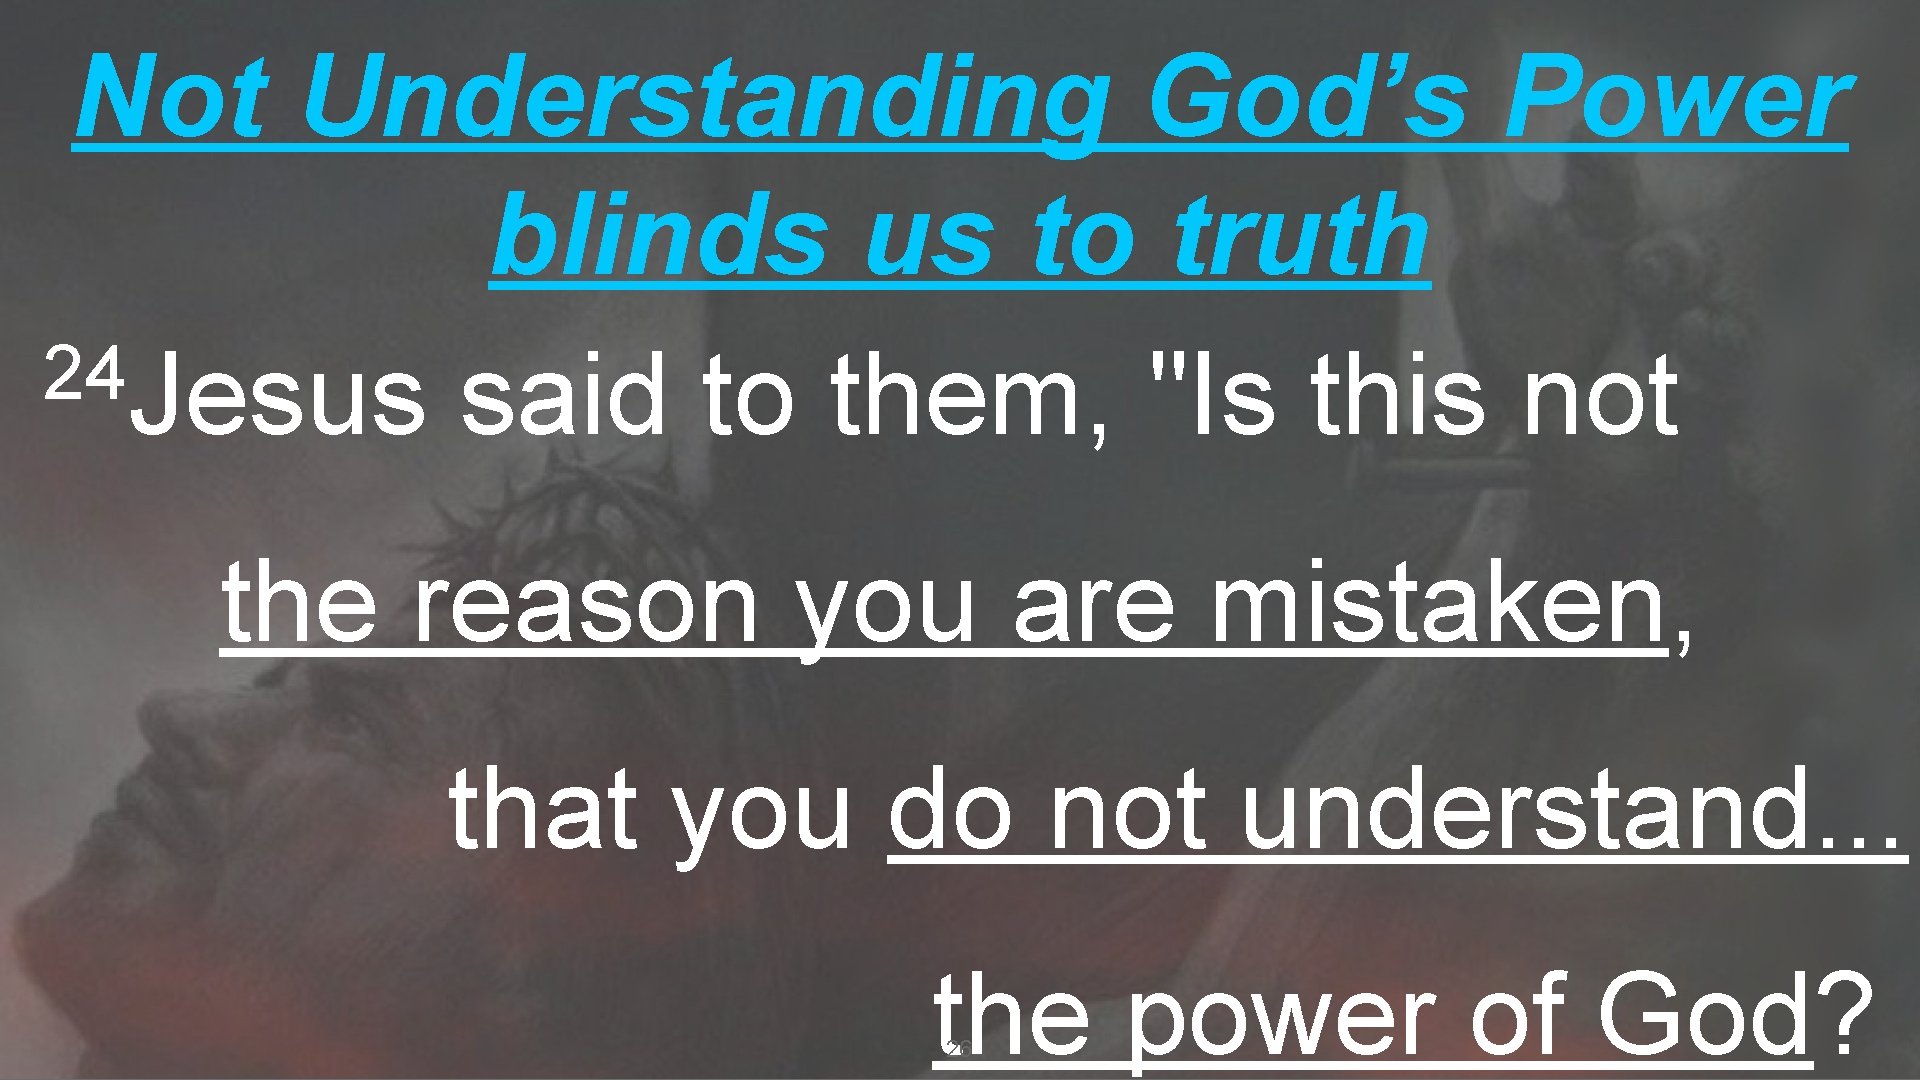 Not Understanding God’s Power blinds us to truth 24 Jesus said to them, "Is